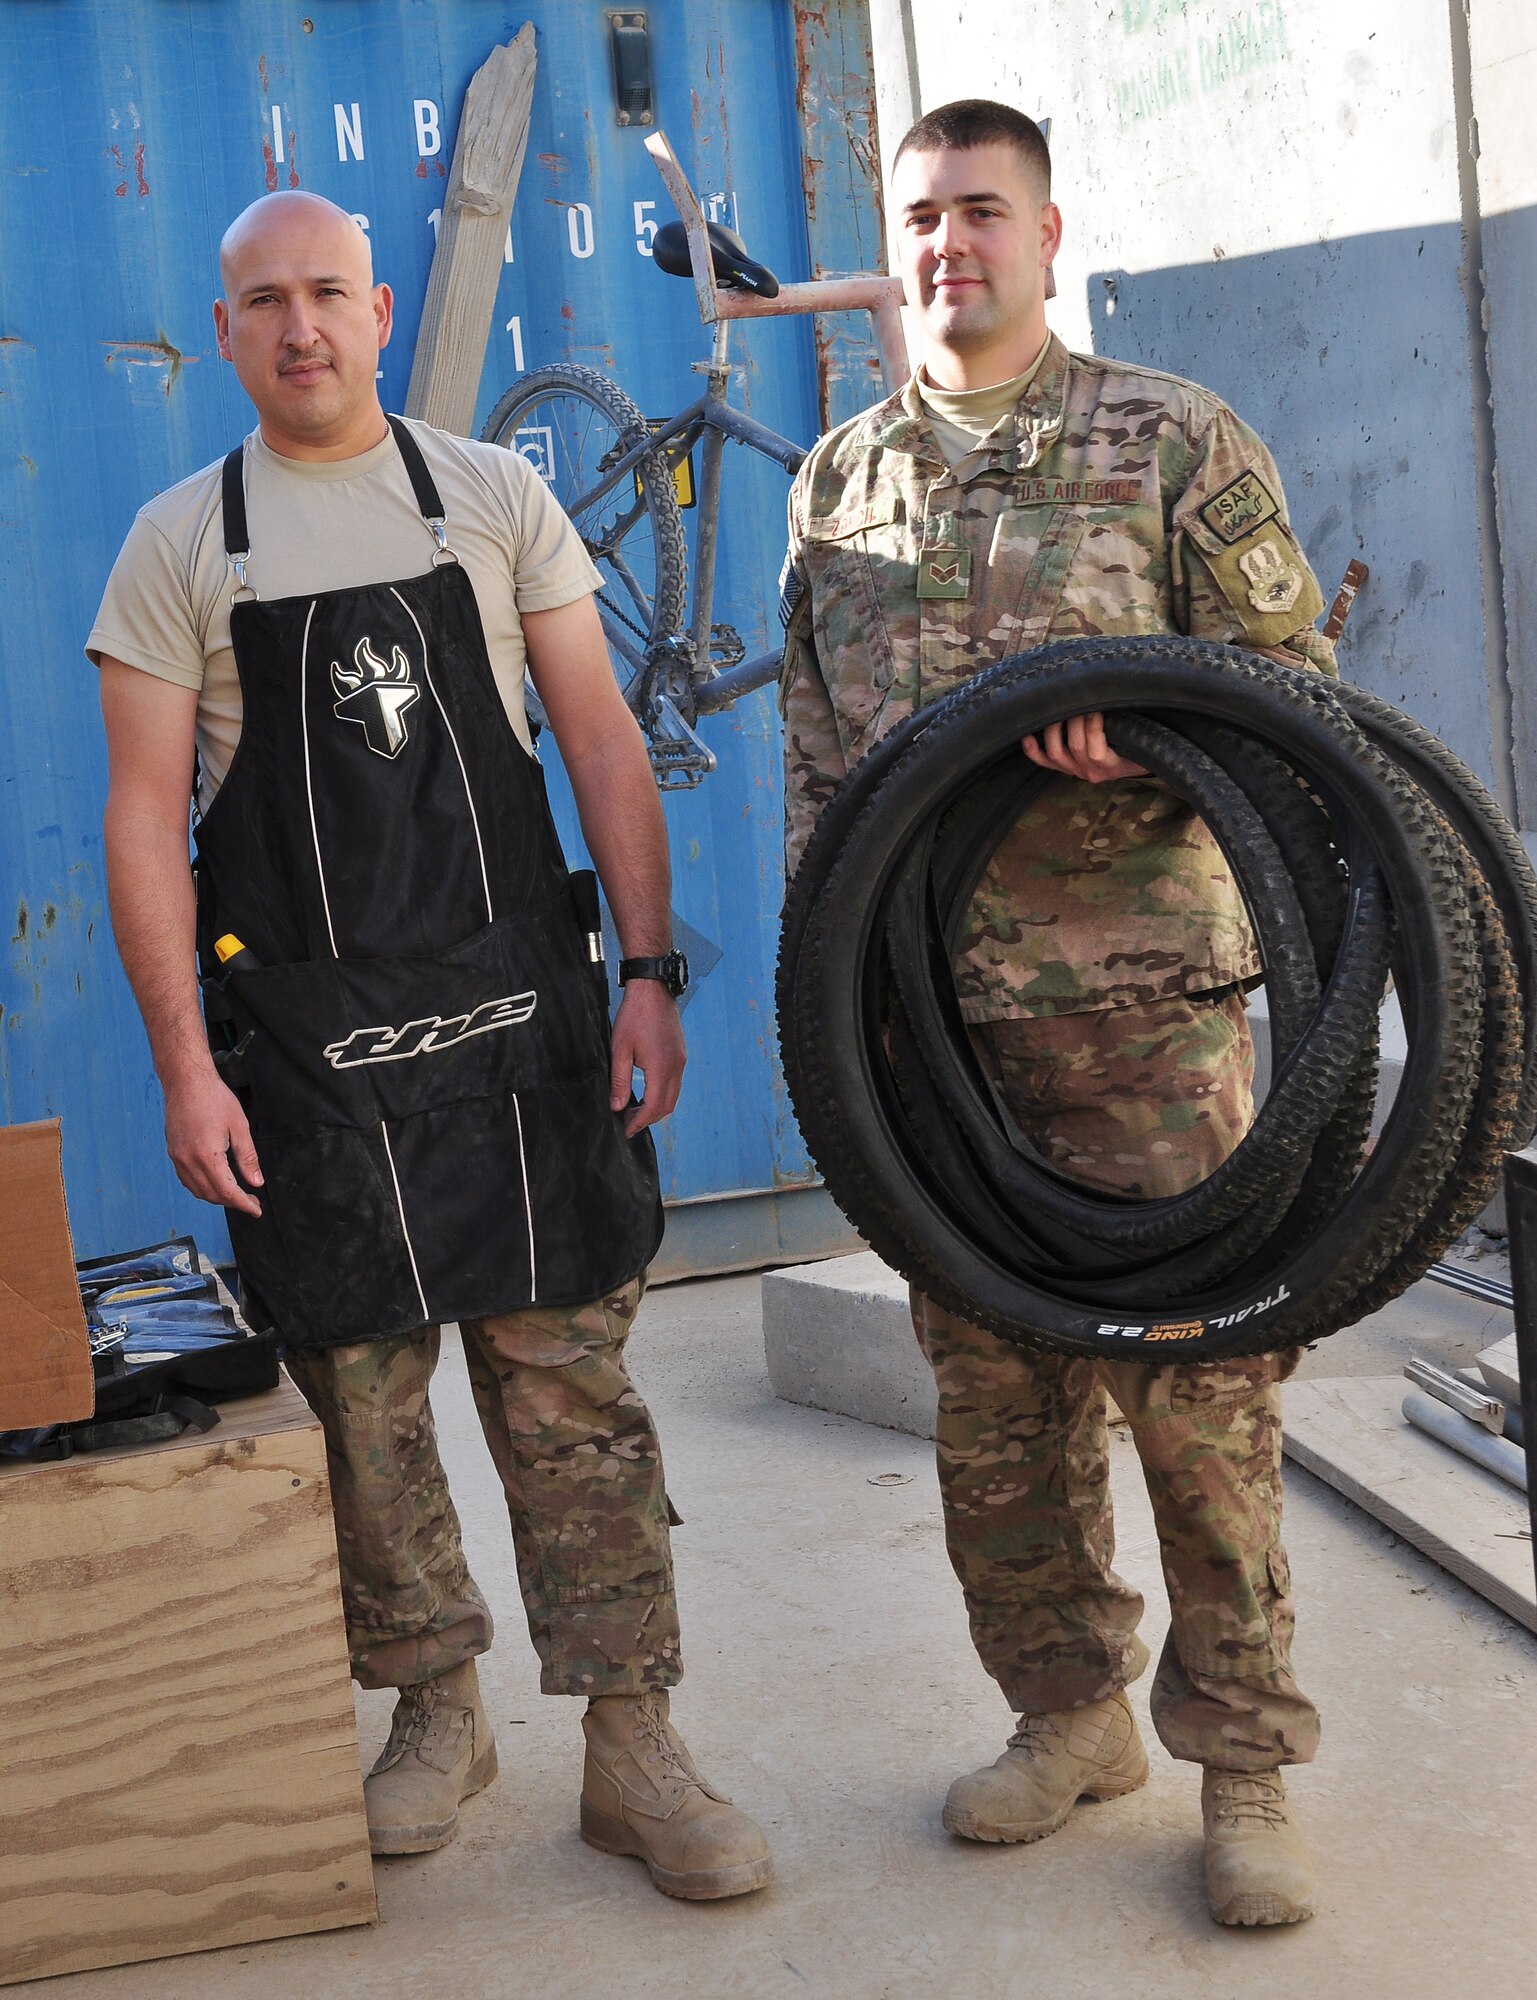 Tech. Sgt. Juan Sanchezduarte (left) and Senior Airman Mark Zorich (right), both assigned to the 451st Expeditionary Logistics Readiness Squadron, pose with some bicycle tires outside Tan Box Bike Repair at Camp Losano, Kandahar Airfield, Afghanistan, Nov. 11, 2013. Both Airmen volunteer their time and resources so service members at KAF can have free bicycle repairs available. (U.S. Air Force photo by Capt. Jason Smith)